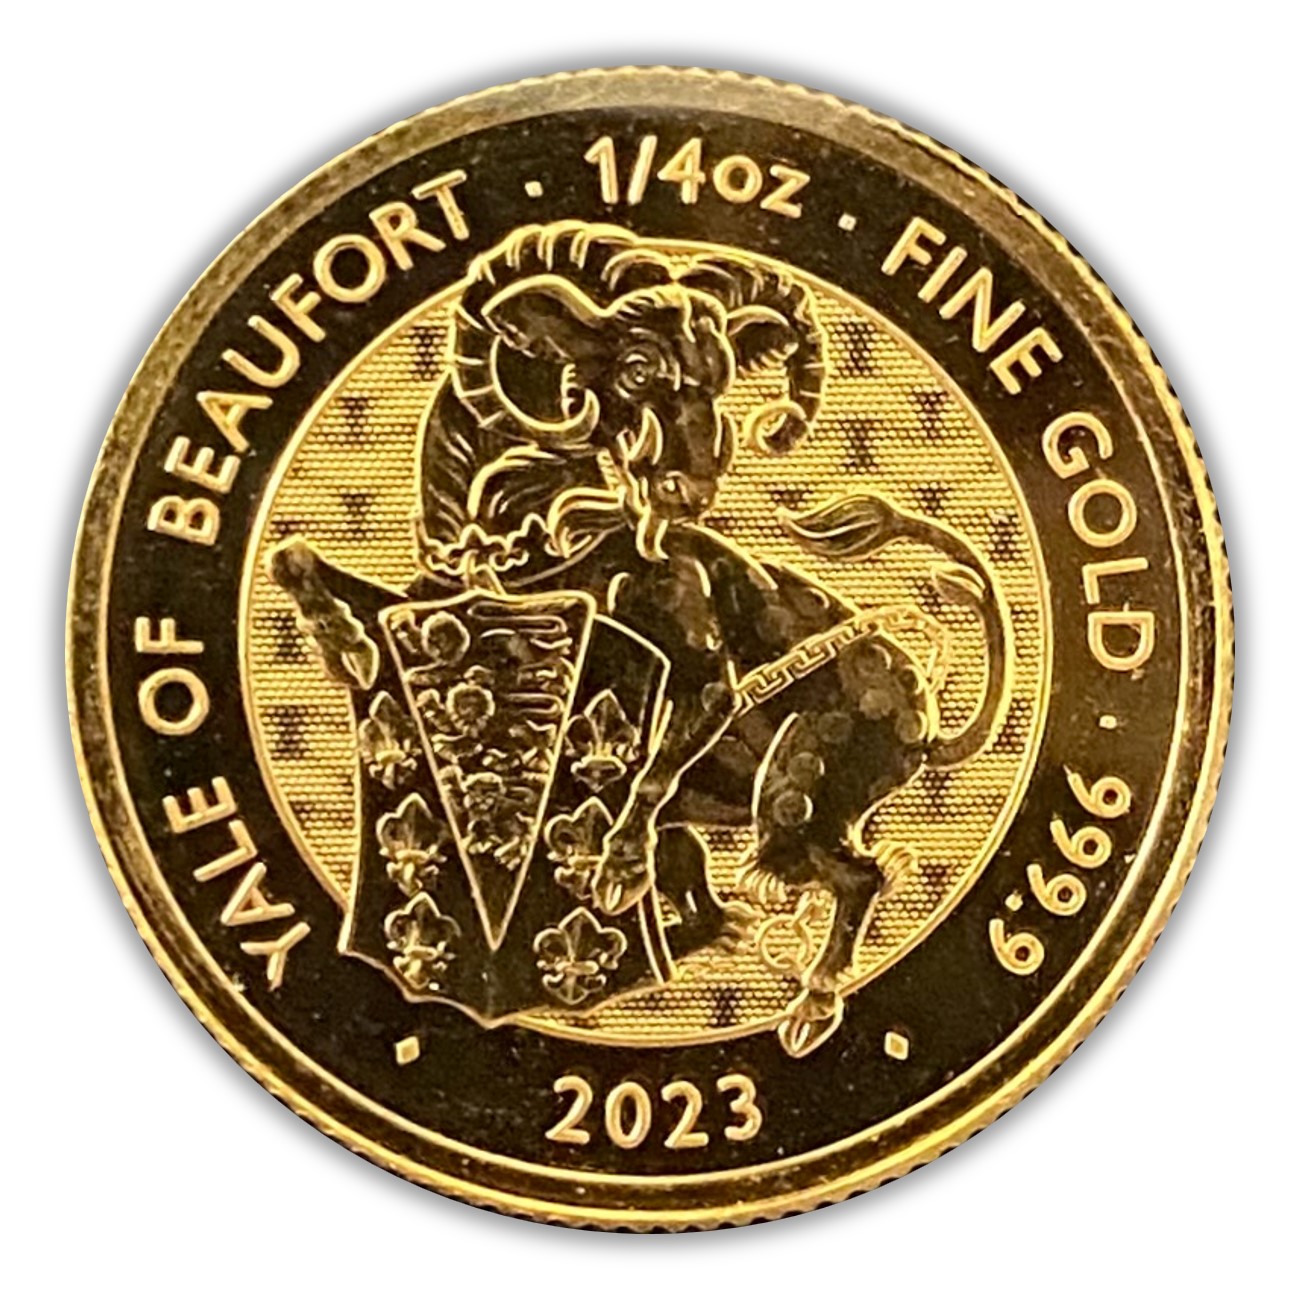 2023 Queens Beast Yale 1/4 oz Gold Coin